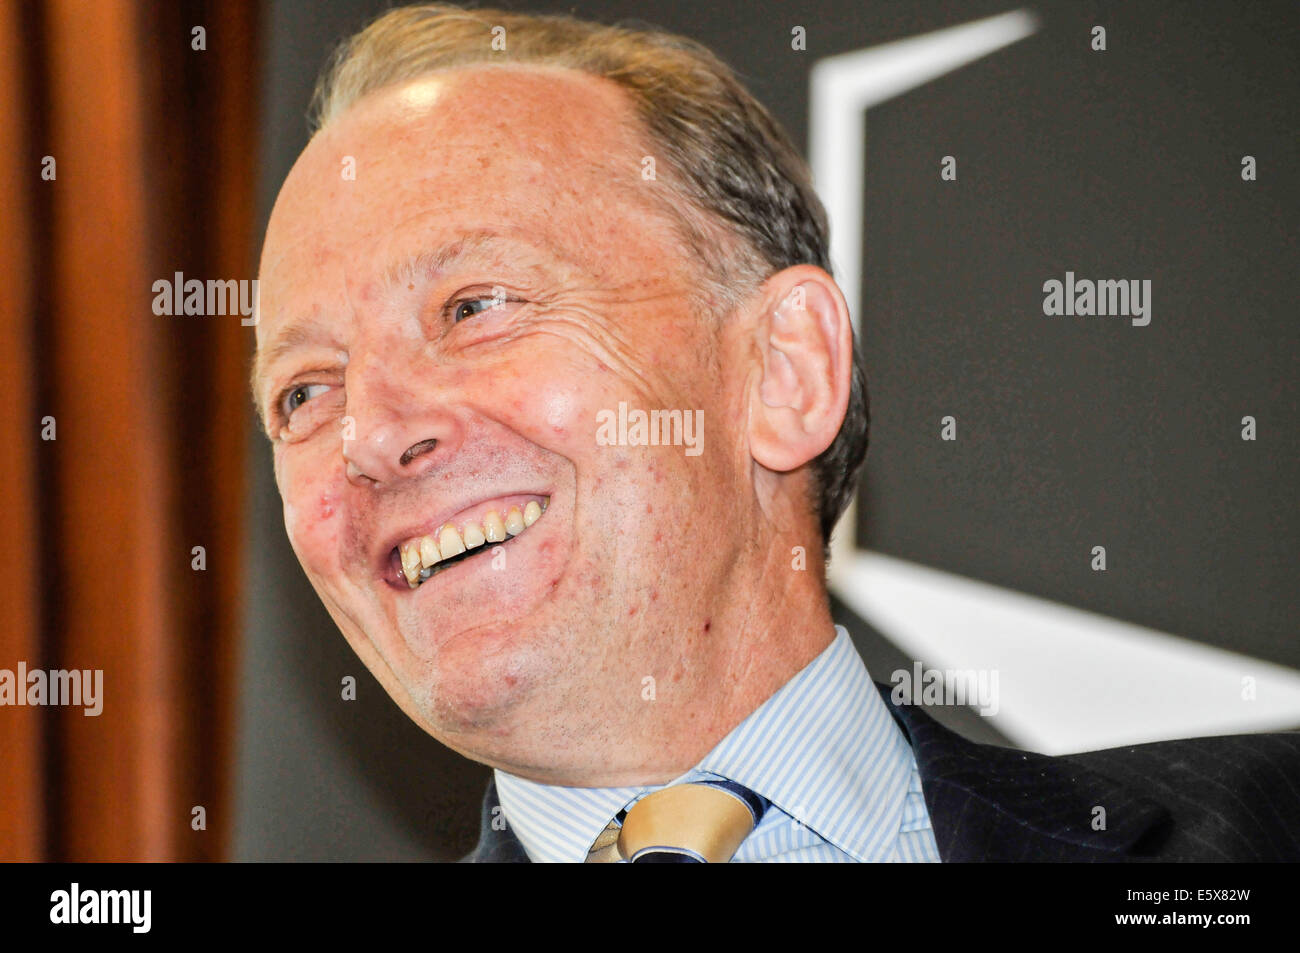 Belfast, Northern Ireland. 7th Aug 2014 - Sir Hugh Orde in discussion with John Ware, Belfast Credit:  Stephen Barnes/Alamy Live News Stock Photo